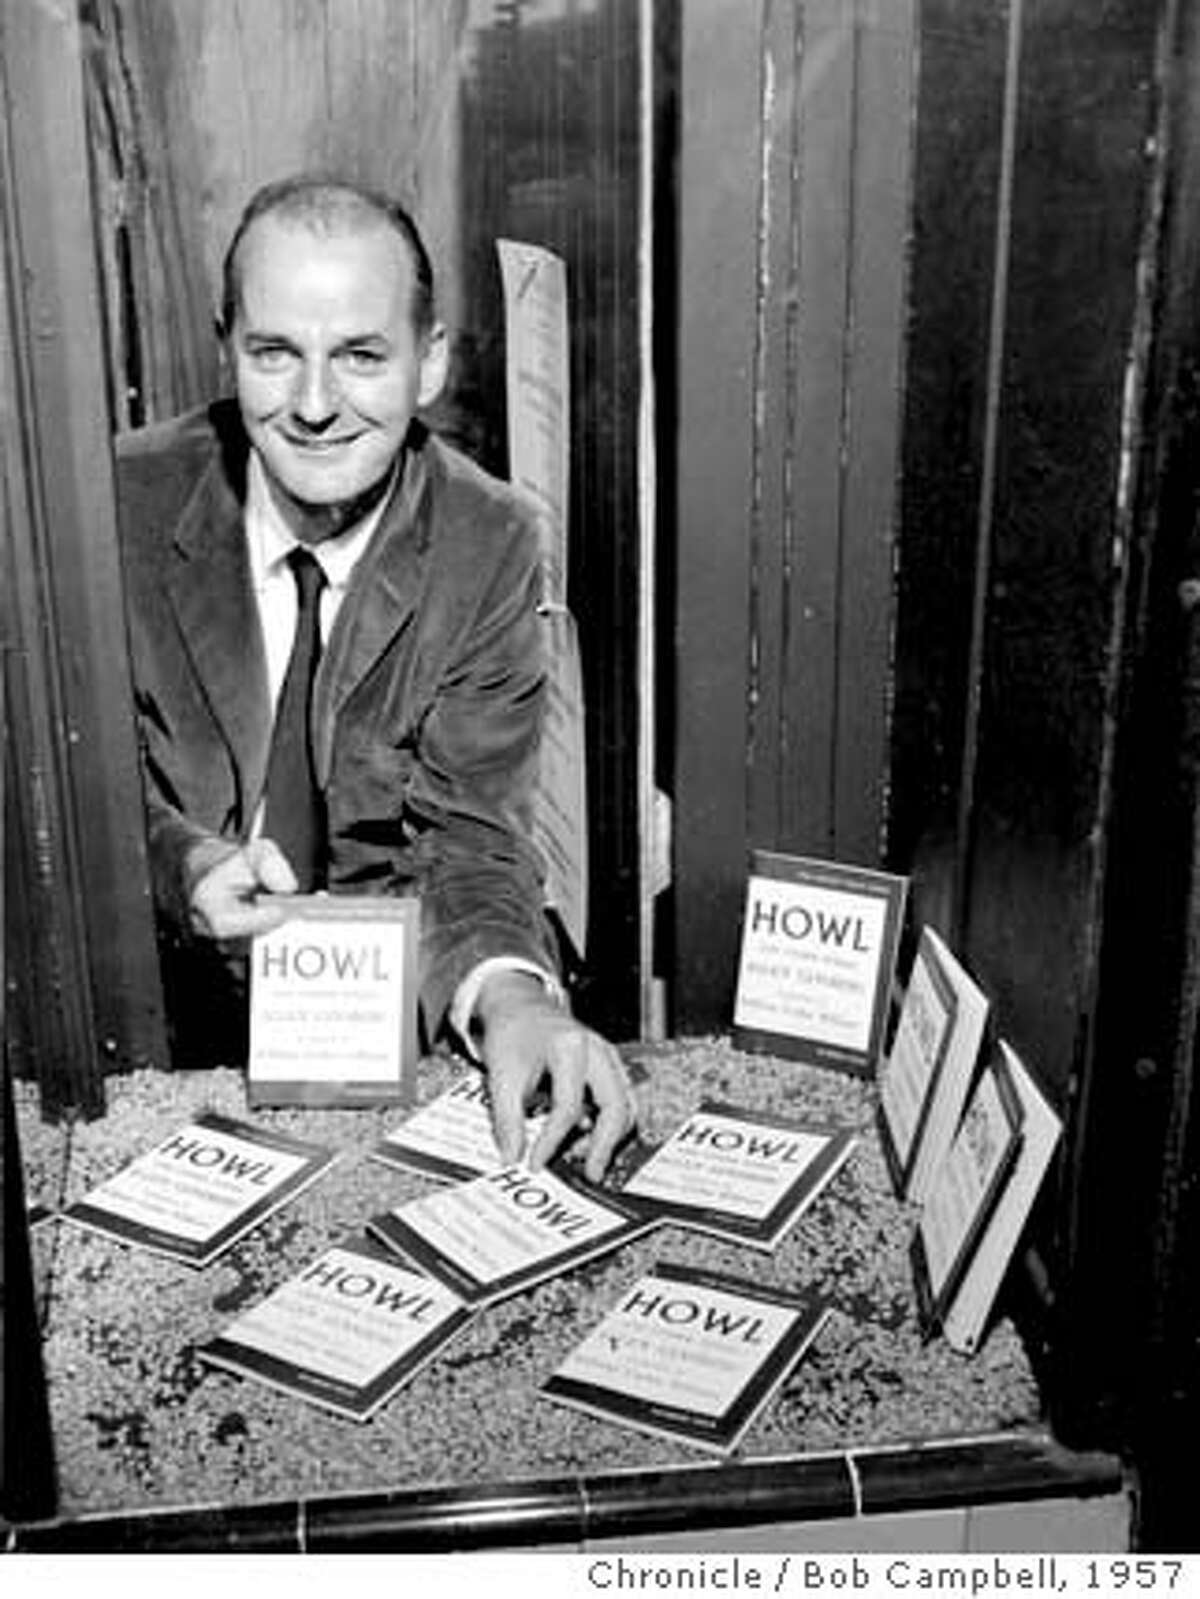 Lawrence Ferlinghetti first published "Howl." He sees FCC pressure on broadcasters as "a repeat in spades of what happened in the 1950s." Chronicle photo, 1957, by Bob Campbell